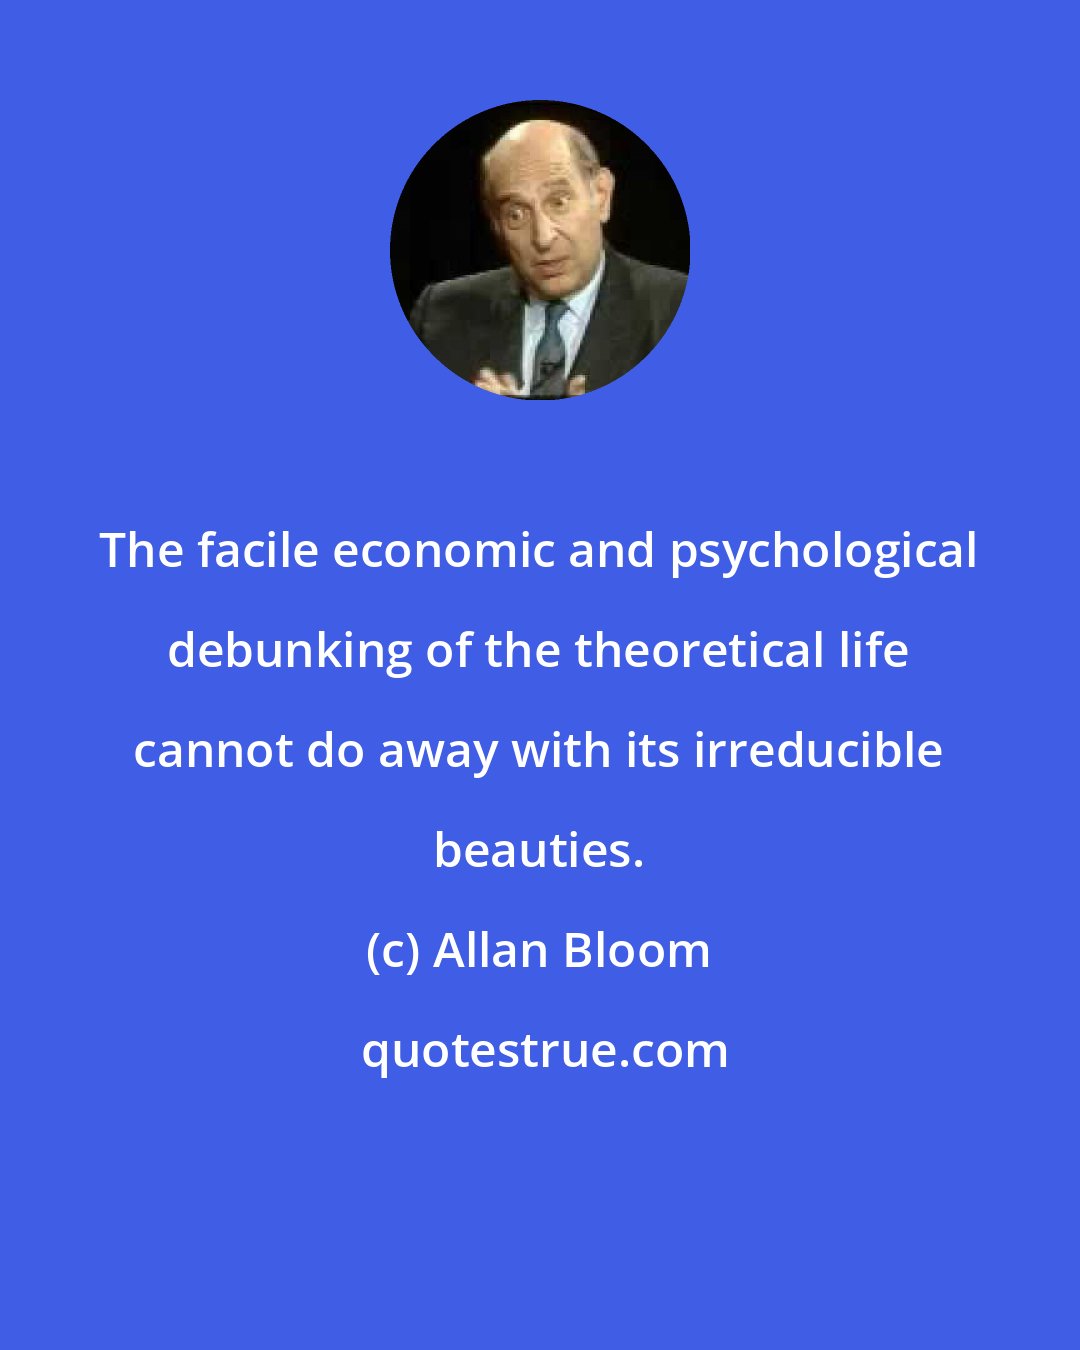 Allan Bloom: The facile economic and psychological debunking of the theoretical life cannot do away with its irreducible beauties.